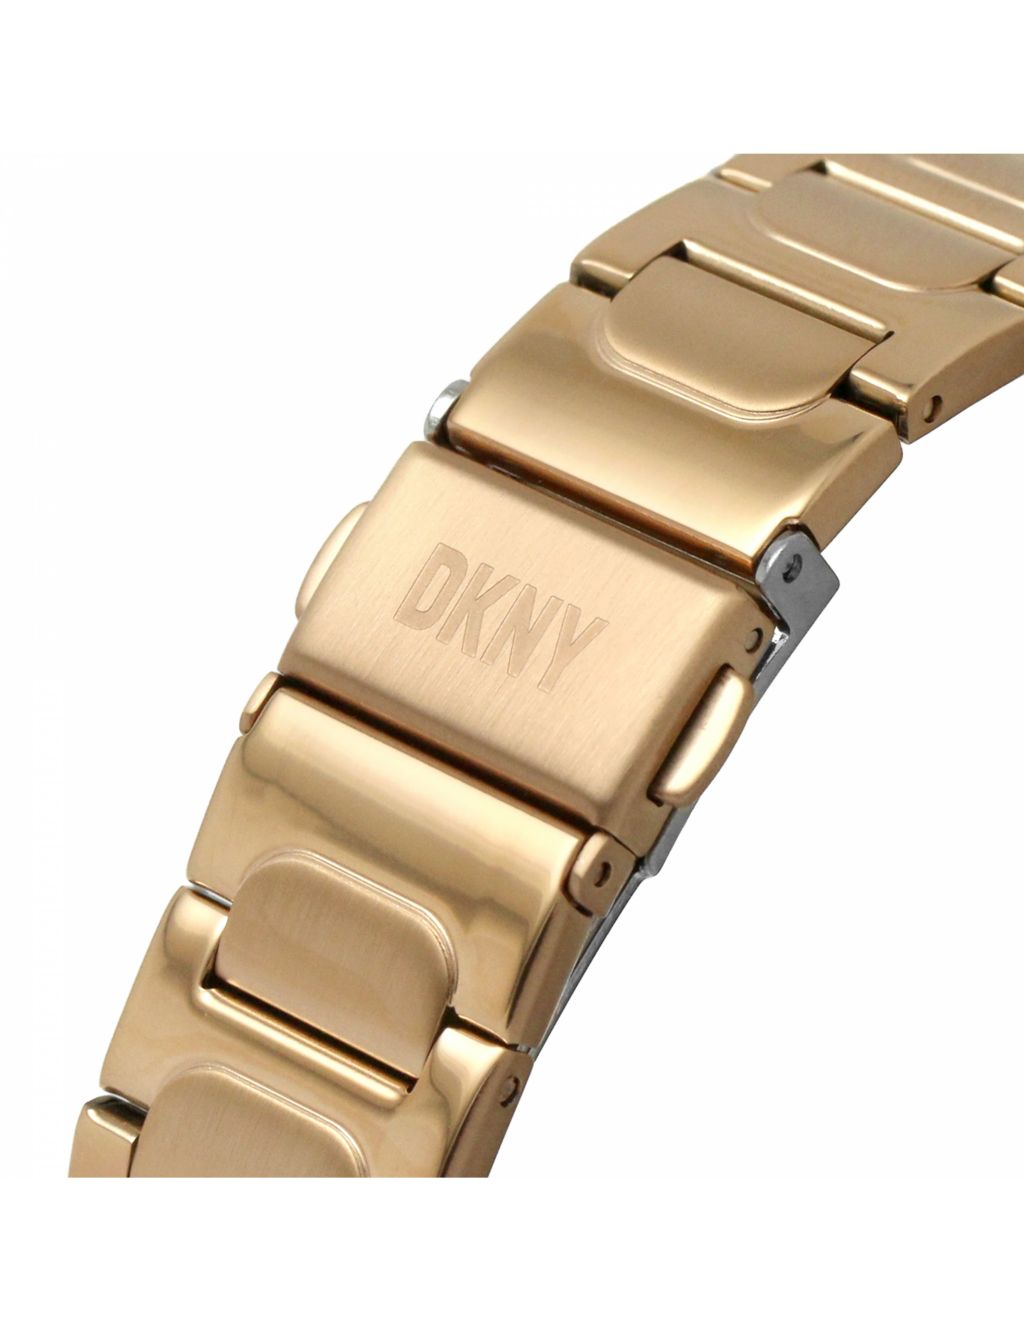 DKNY 7th Avenue Rose Gold Stainless Steel Watch image 4